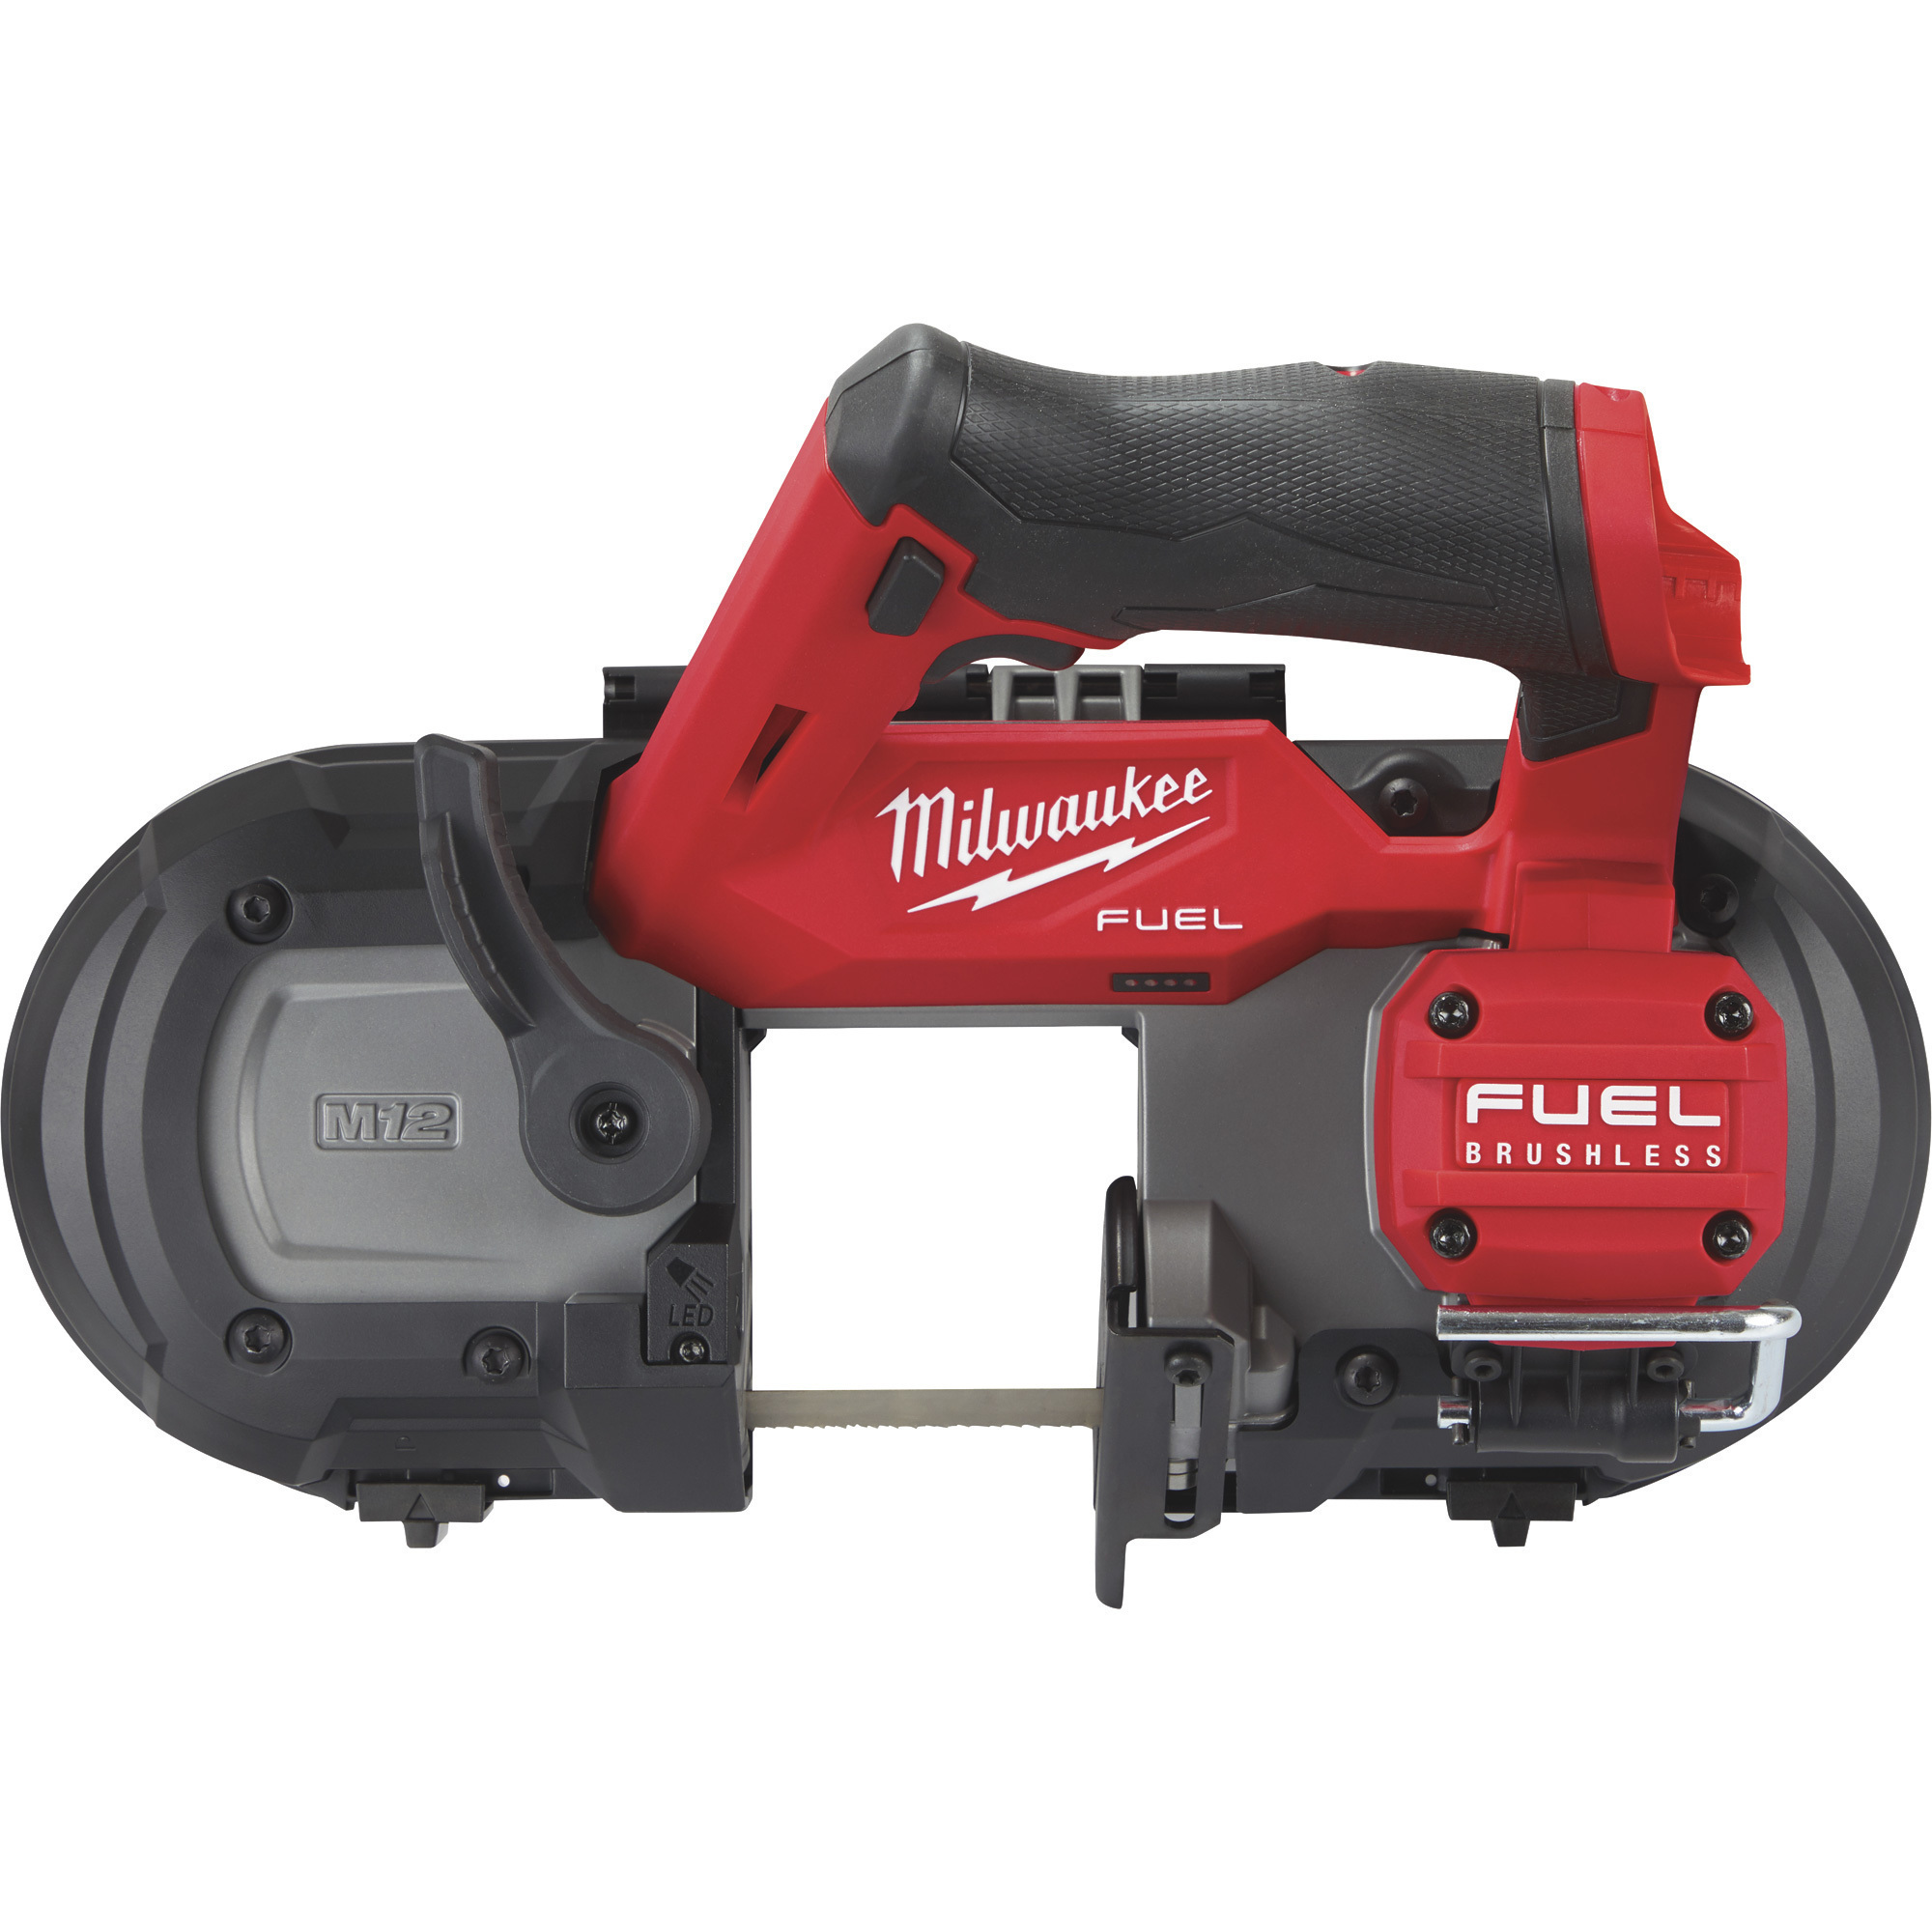 Milwaukee M12 FUEL Compact Band Saw, Tool Only, Model 2529-20